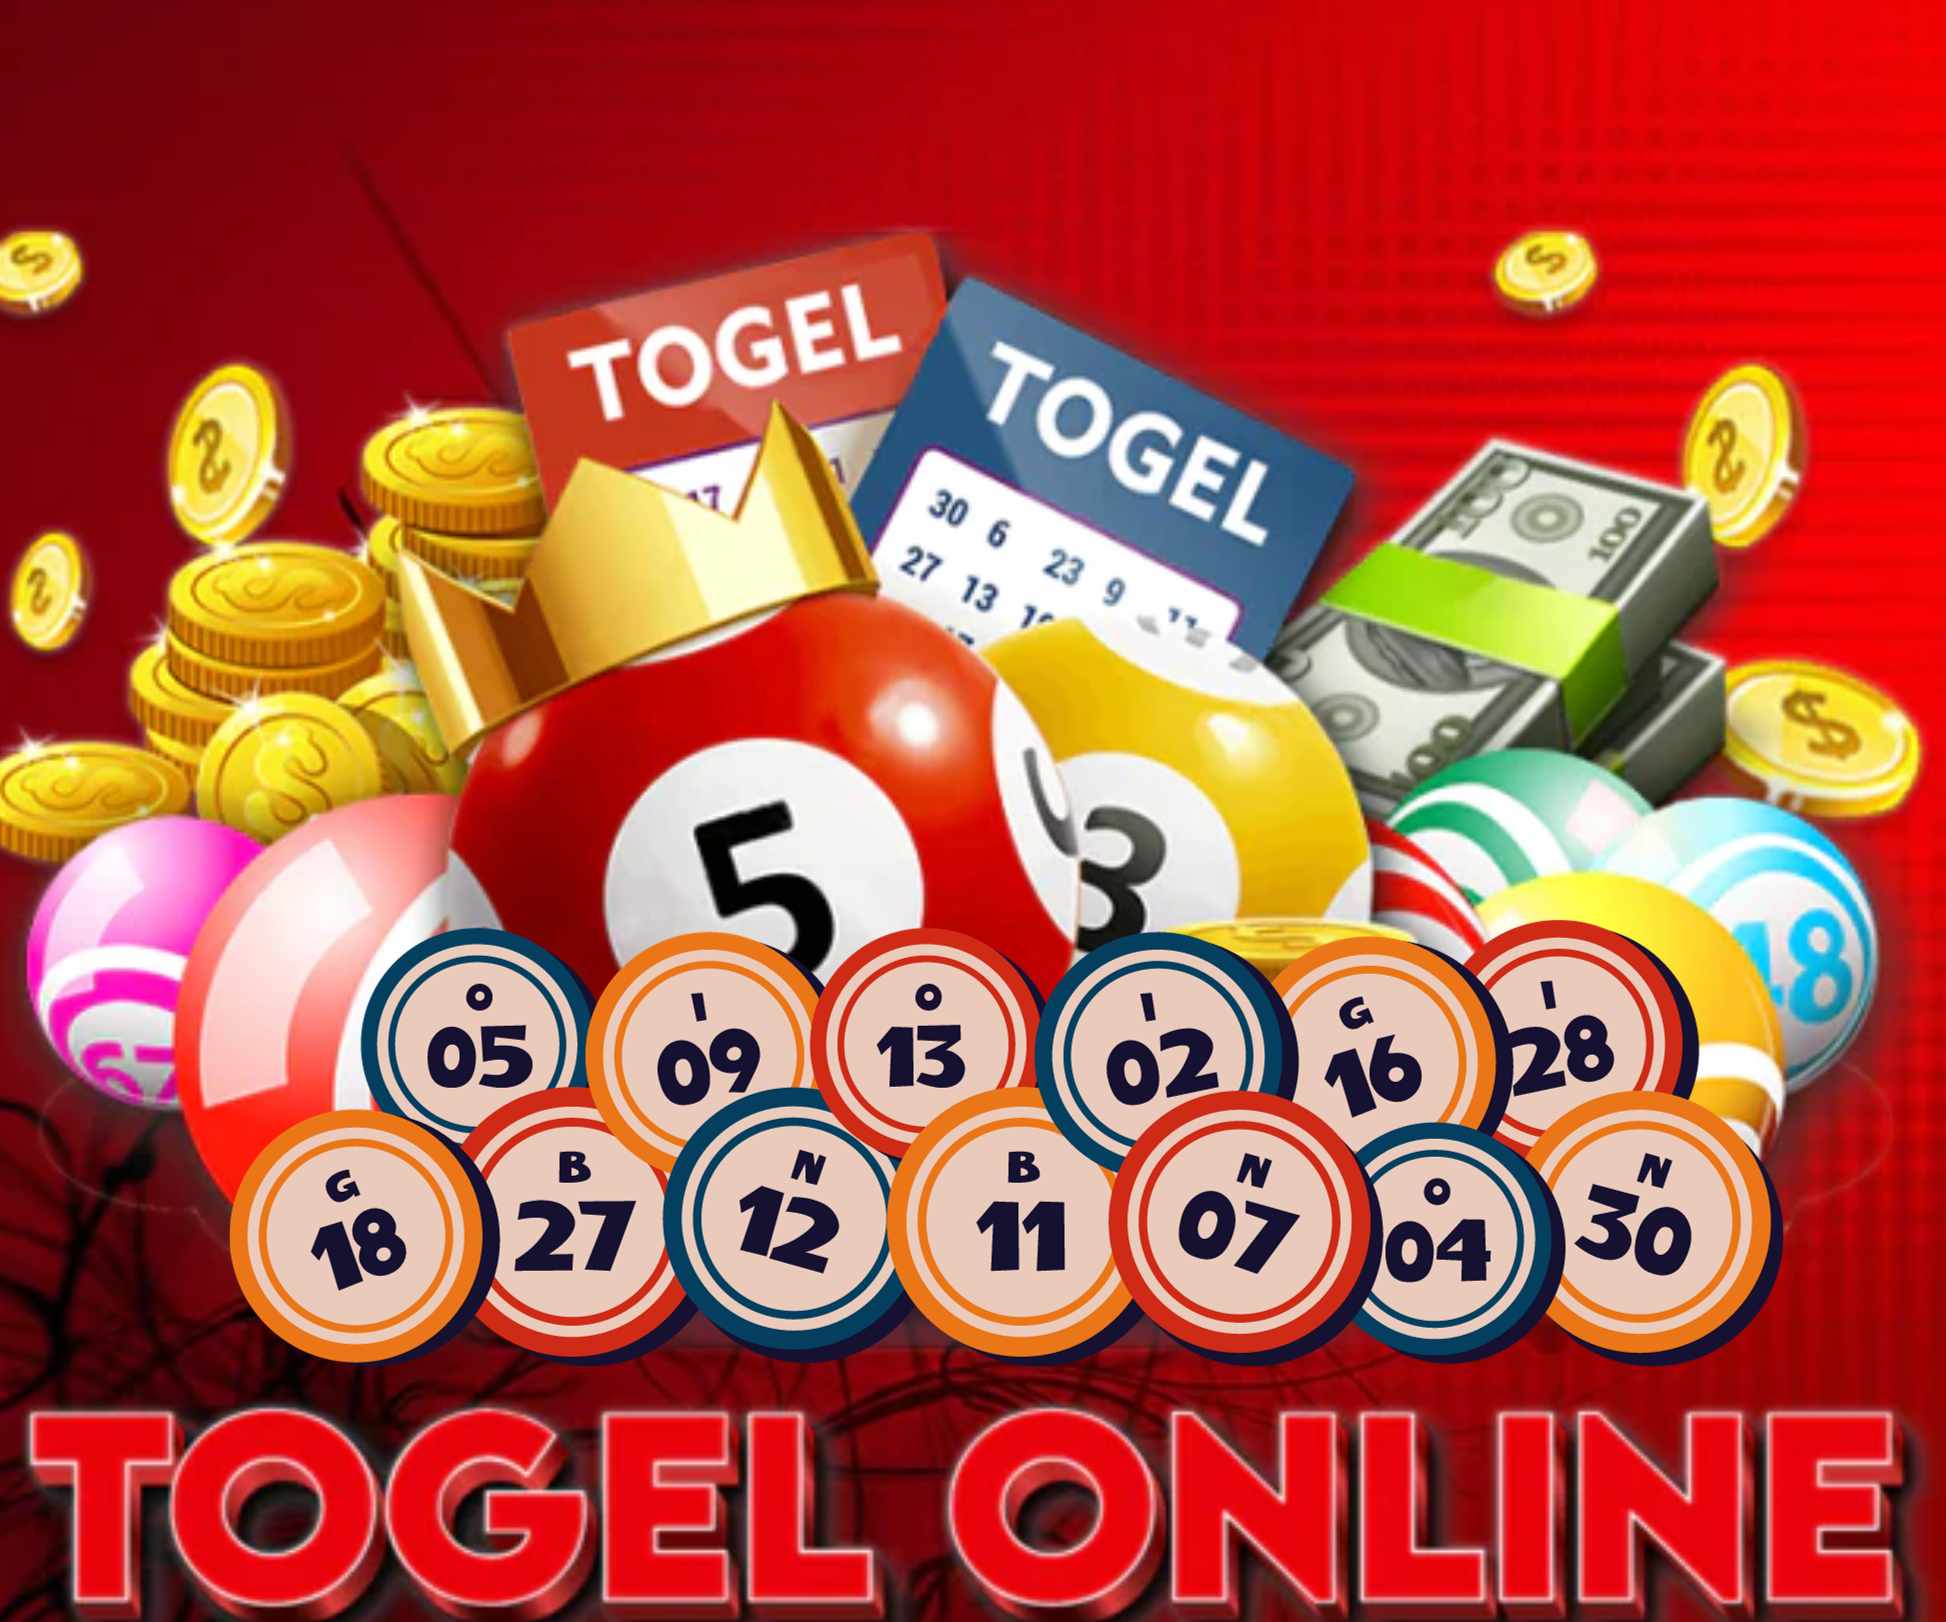 Hongkong, Singapore, Sidney Togel is today's lottery market